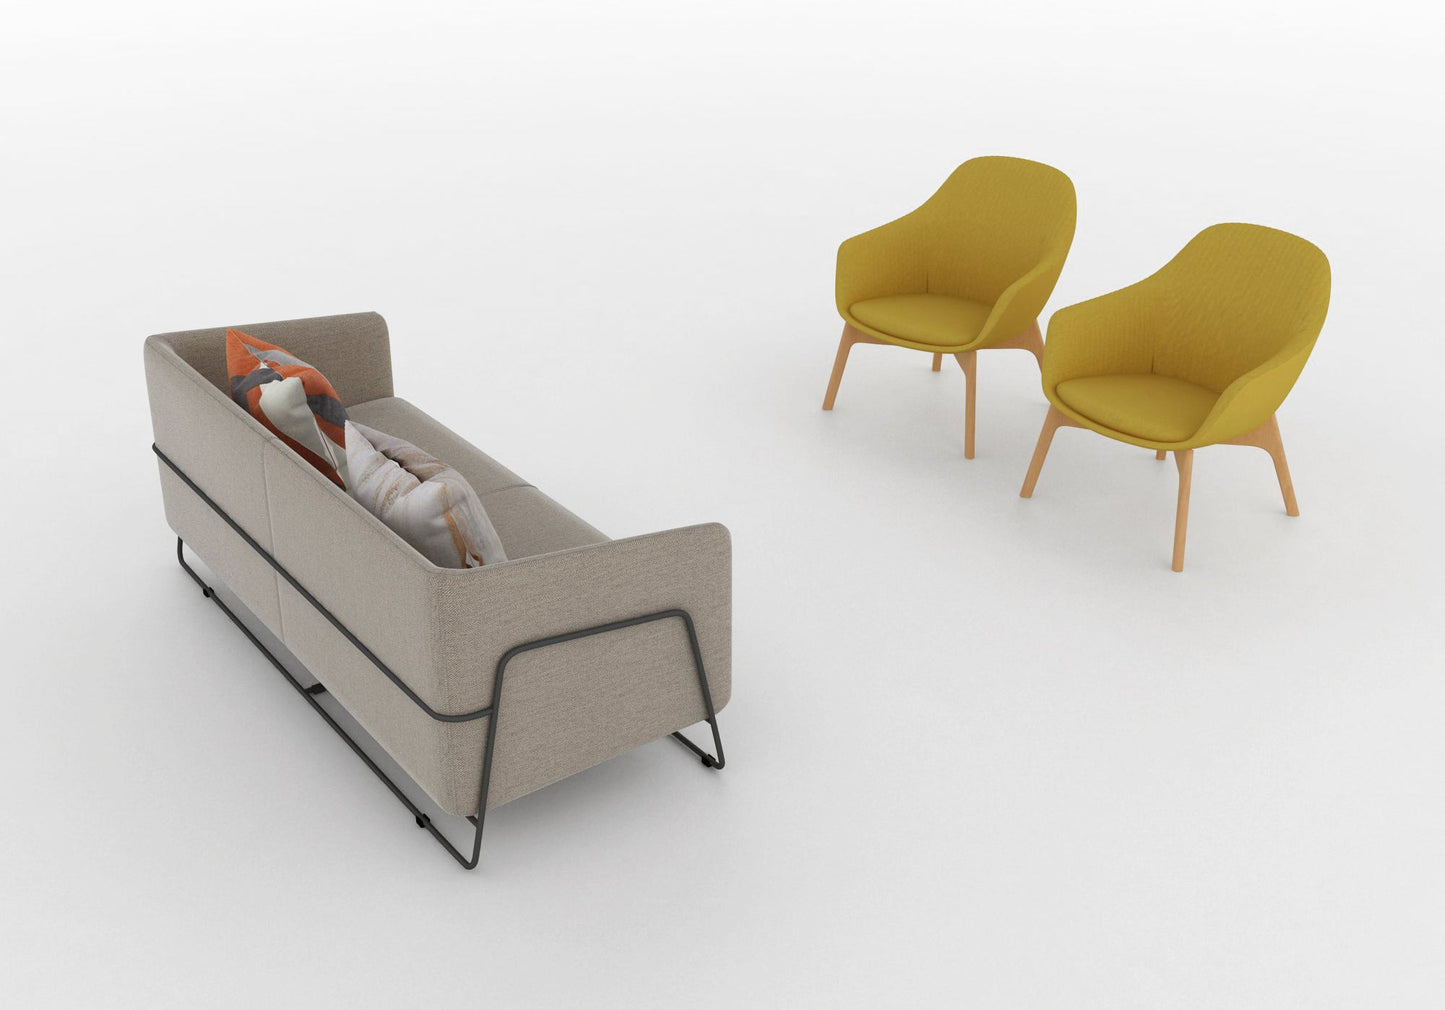 Load image into Gallery viewer, Hanno Loveseat by Friant - Wholesale Office Furniture
